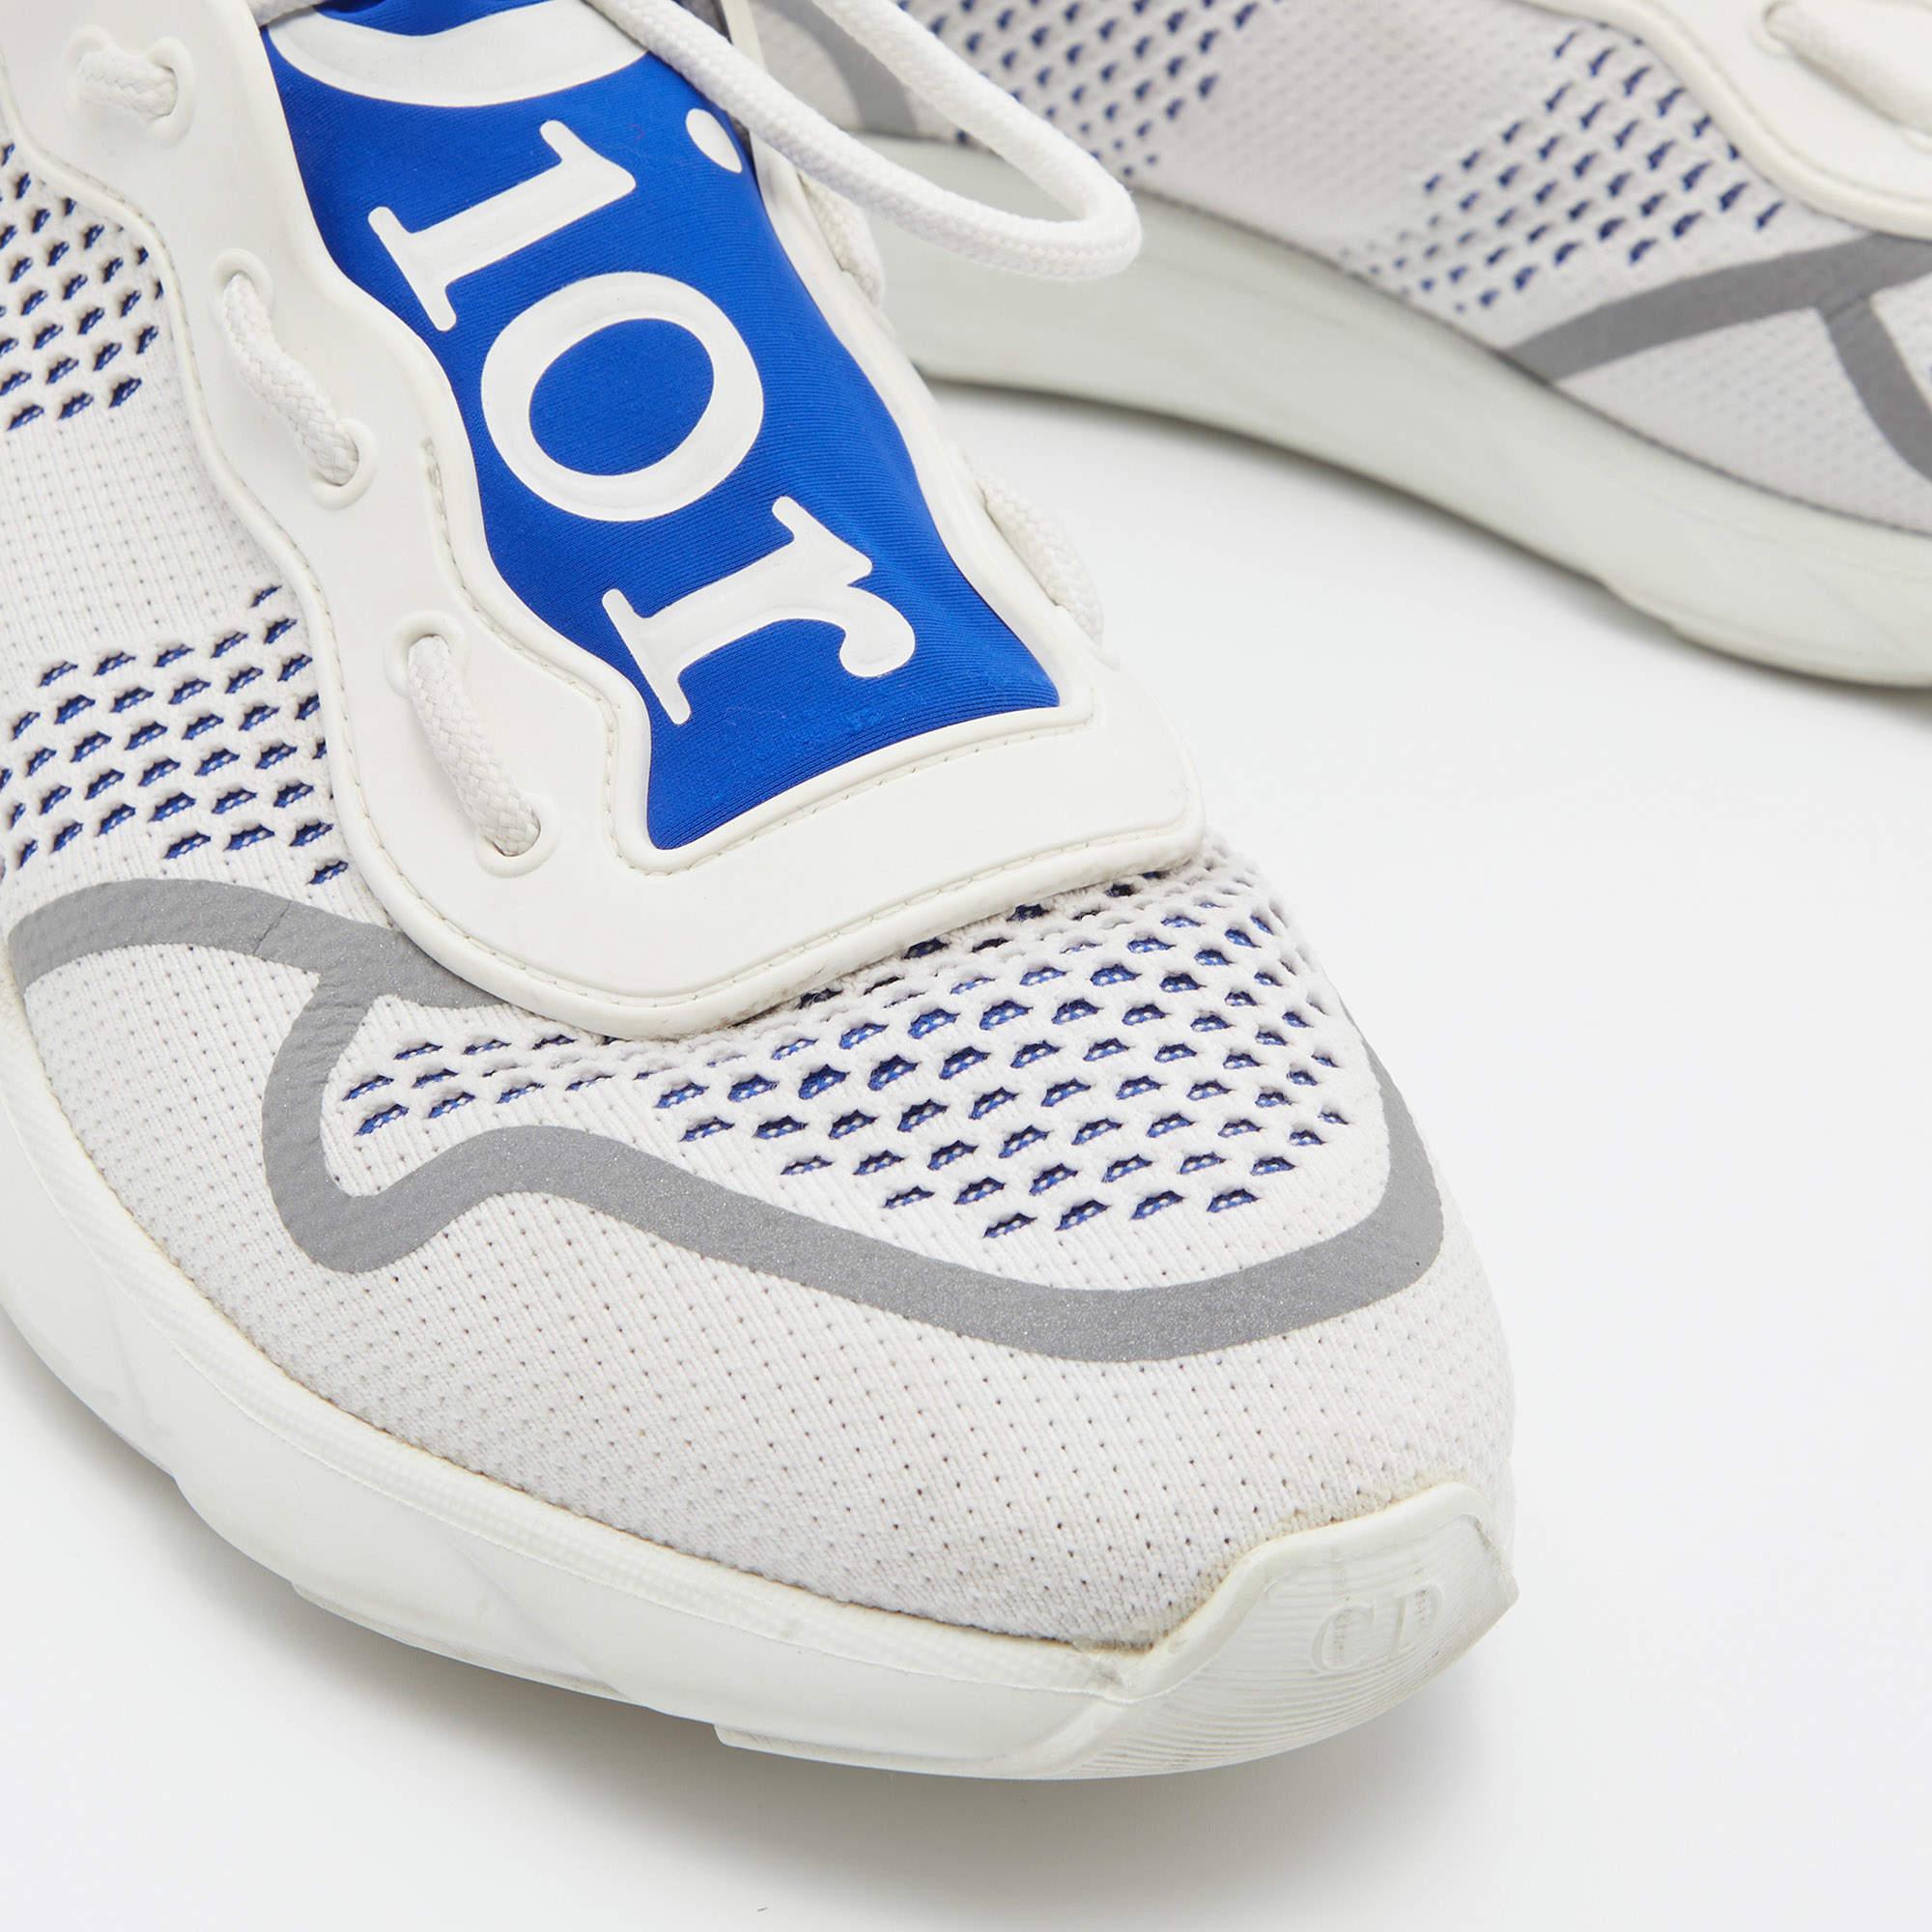 Dior Homme White/Blue Knit Fabric and Neoprene B21 Neo Sneakers Size 41 2